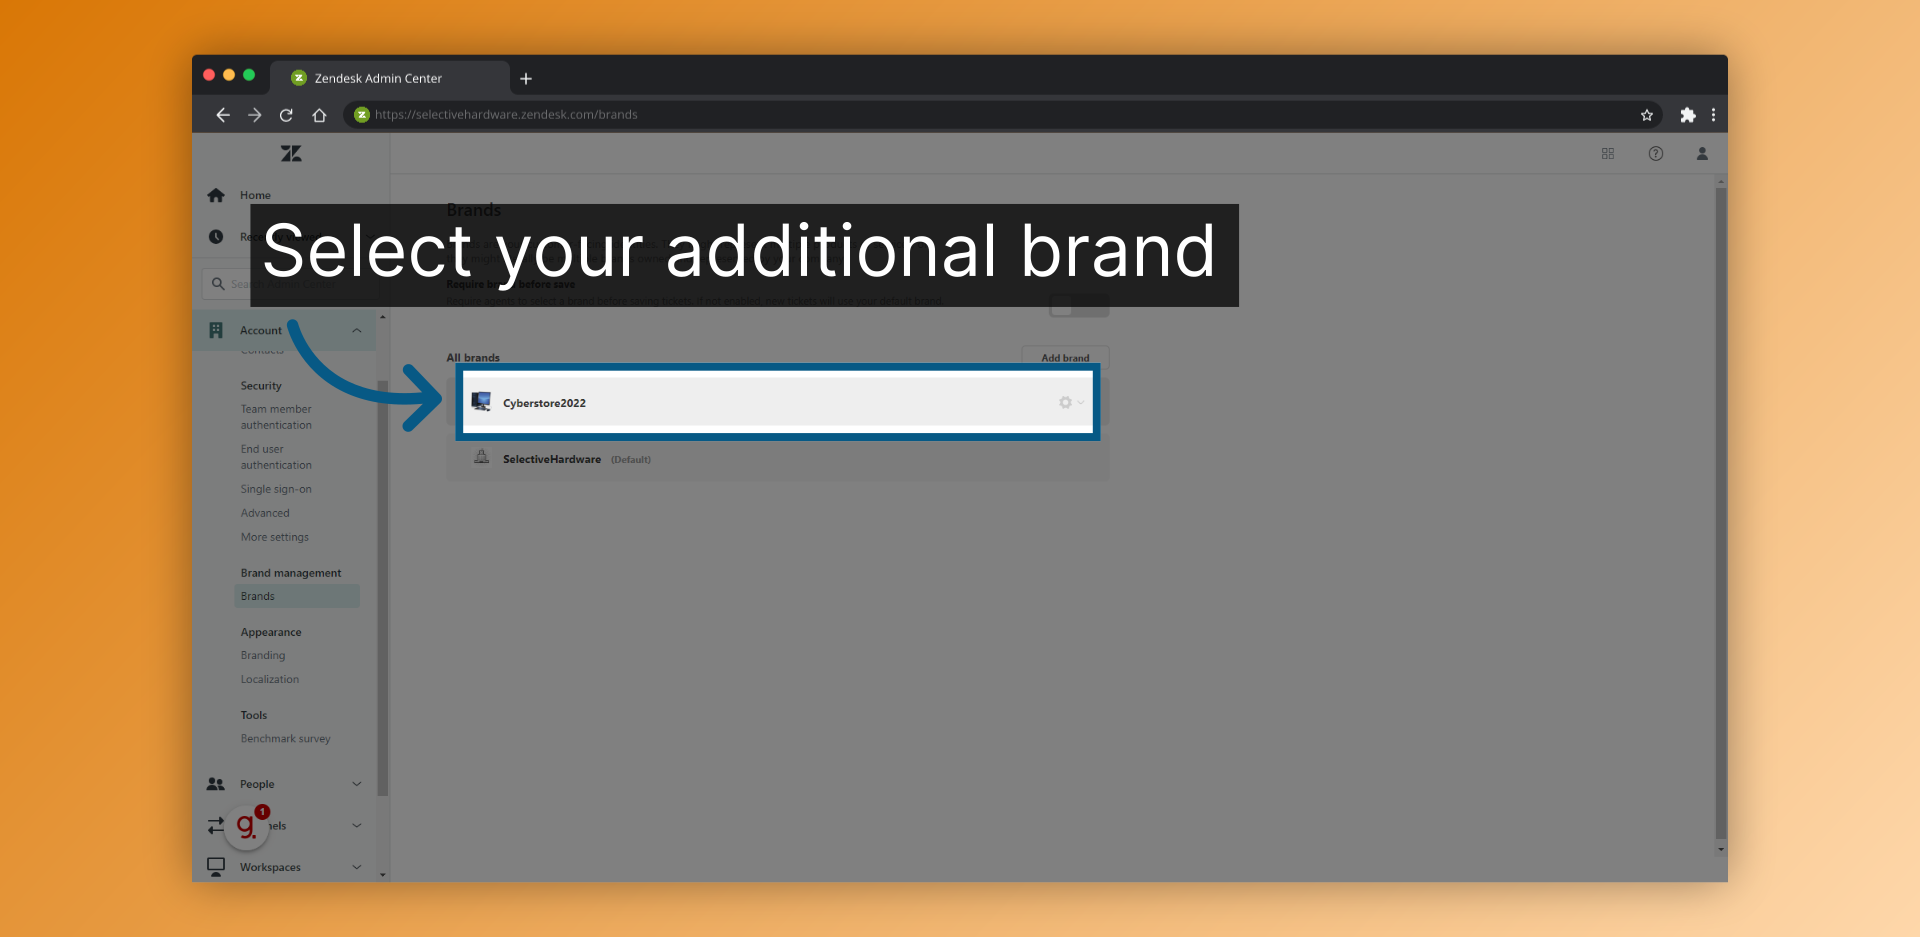 Select your additional brand